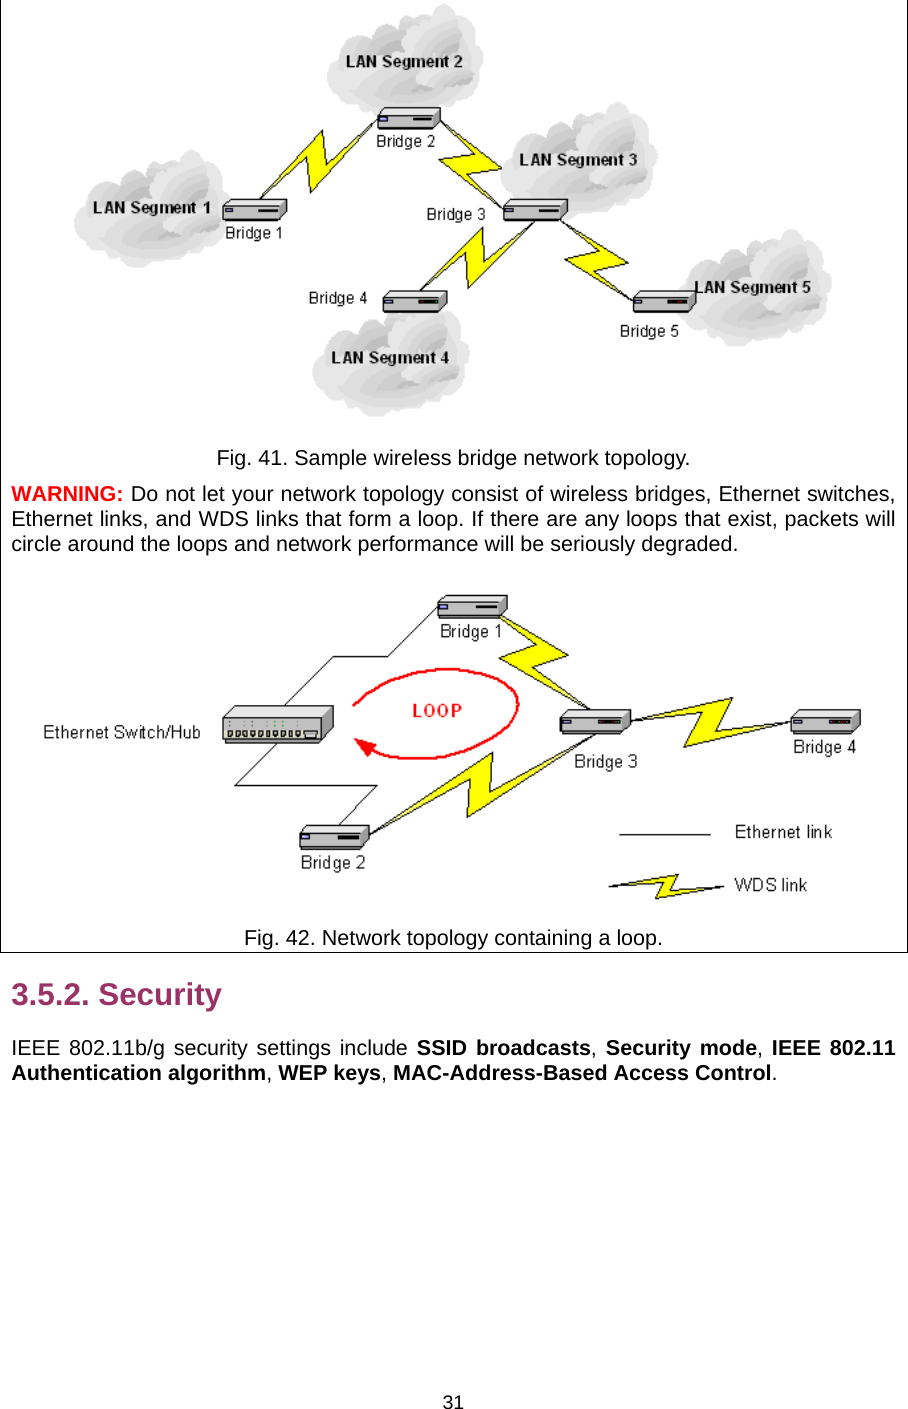   31 Fig. 41. Sample wireless bridge network topology. WARNING: Do not let your network topology consist of wireless bridges, Ethernet switches, Ethernet links, and WDS links that form a loop. If there are any loops that exist, packets will circle around the loops and network performance will be seriously degraded.  Fig. 42. Network topology containing a loop. 3.5.2. Security IEEE 802.11b/g security settings include SSID broadcasts, Security mode, IEEE 802.11 Authentication algorithm, WEP keys, MAC-Address-Based Access Control. 